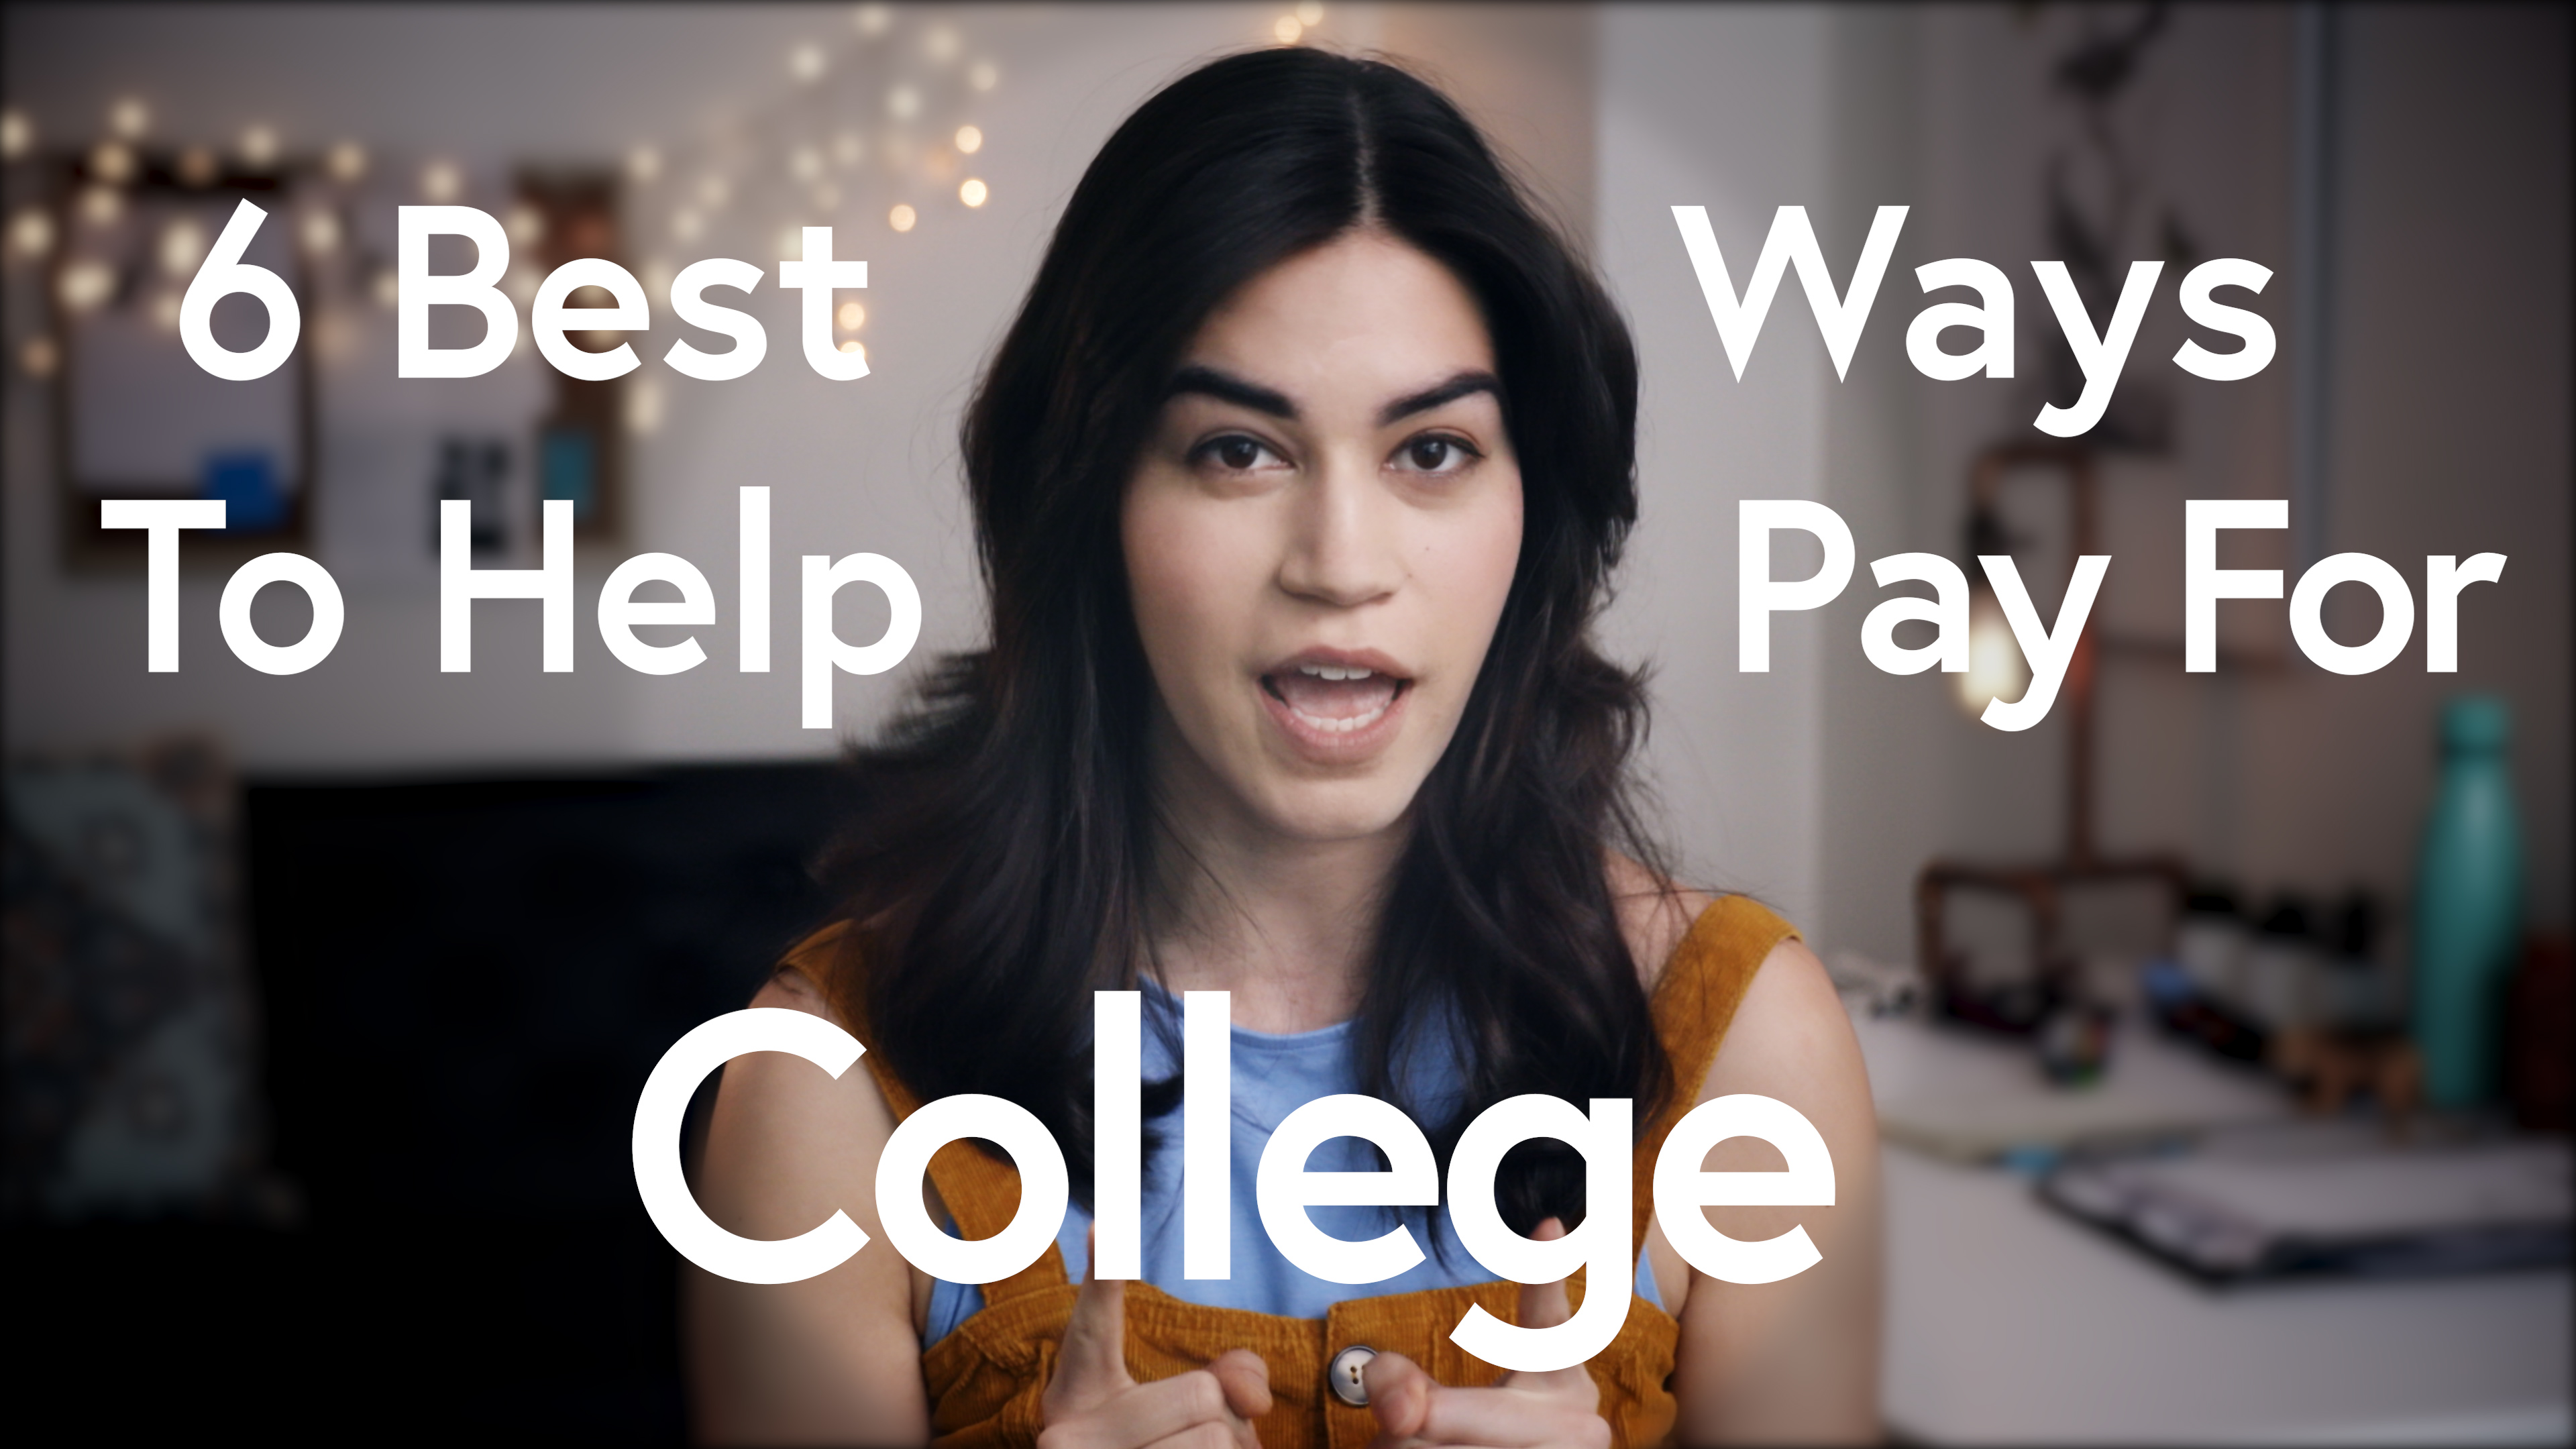 College Ave Student Loans Video Thumbnail: 6 Best Ways to Help Pay For College